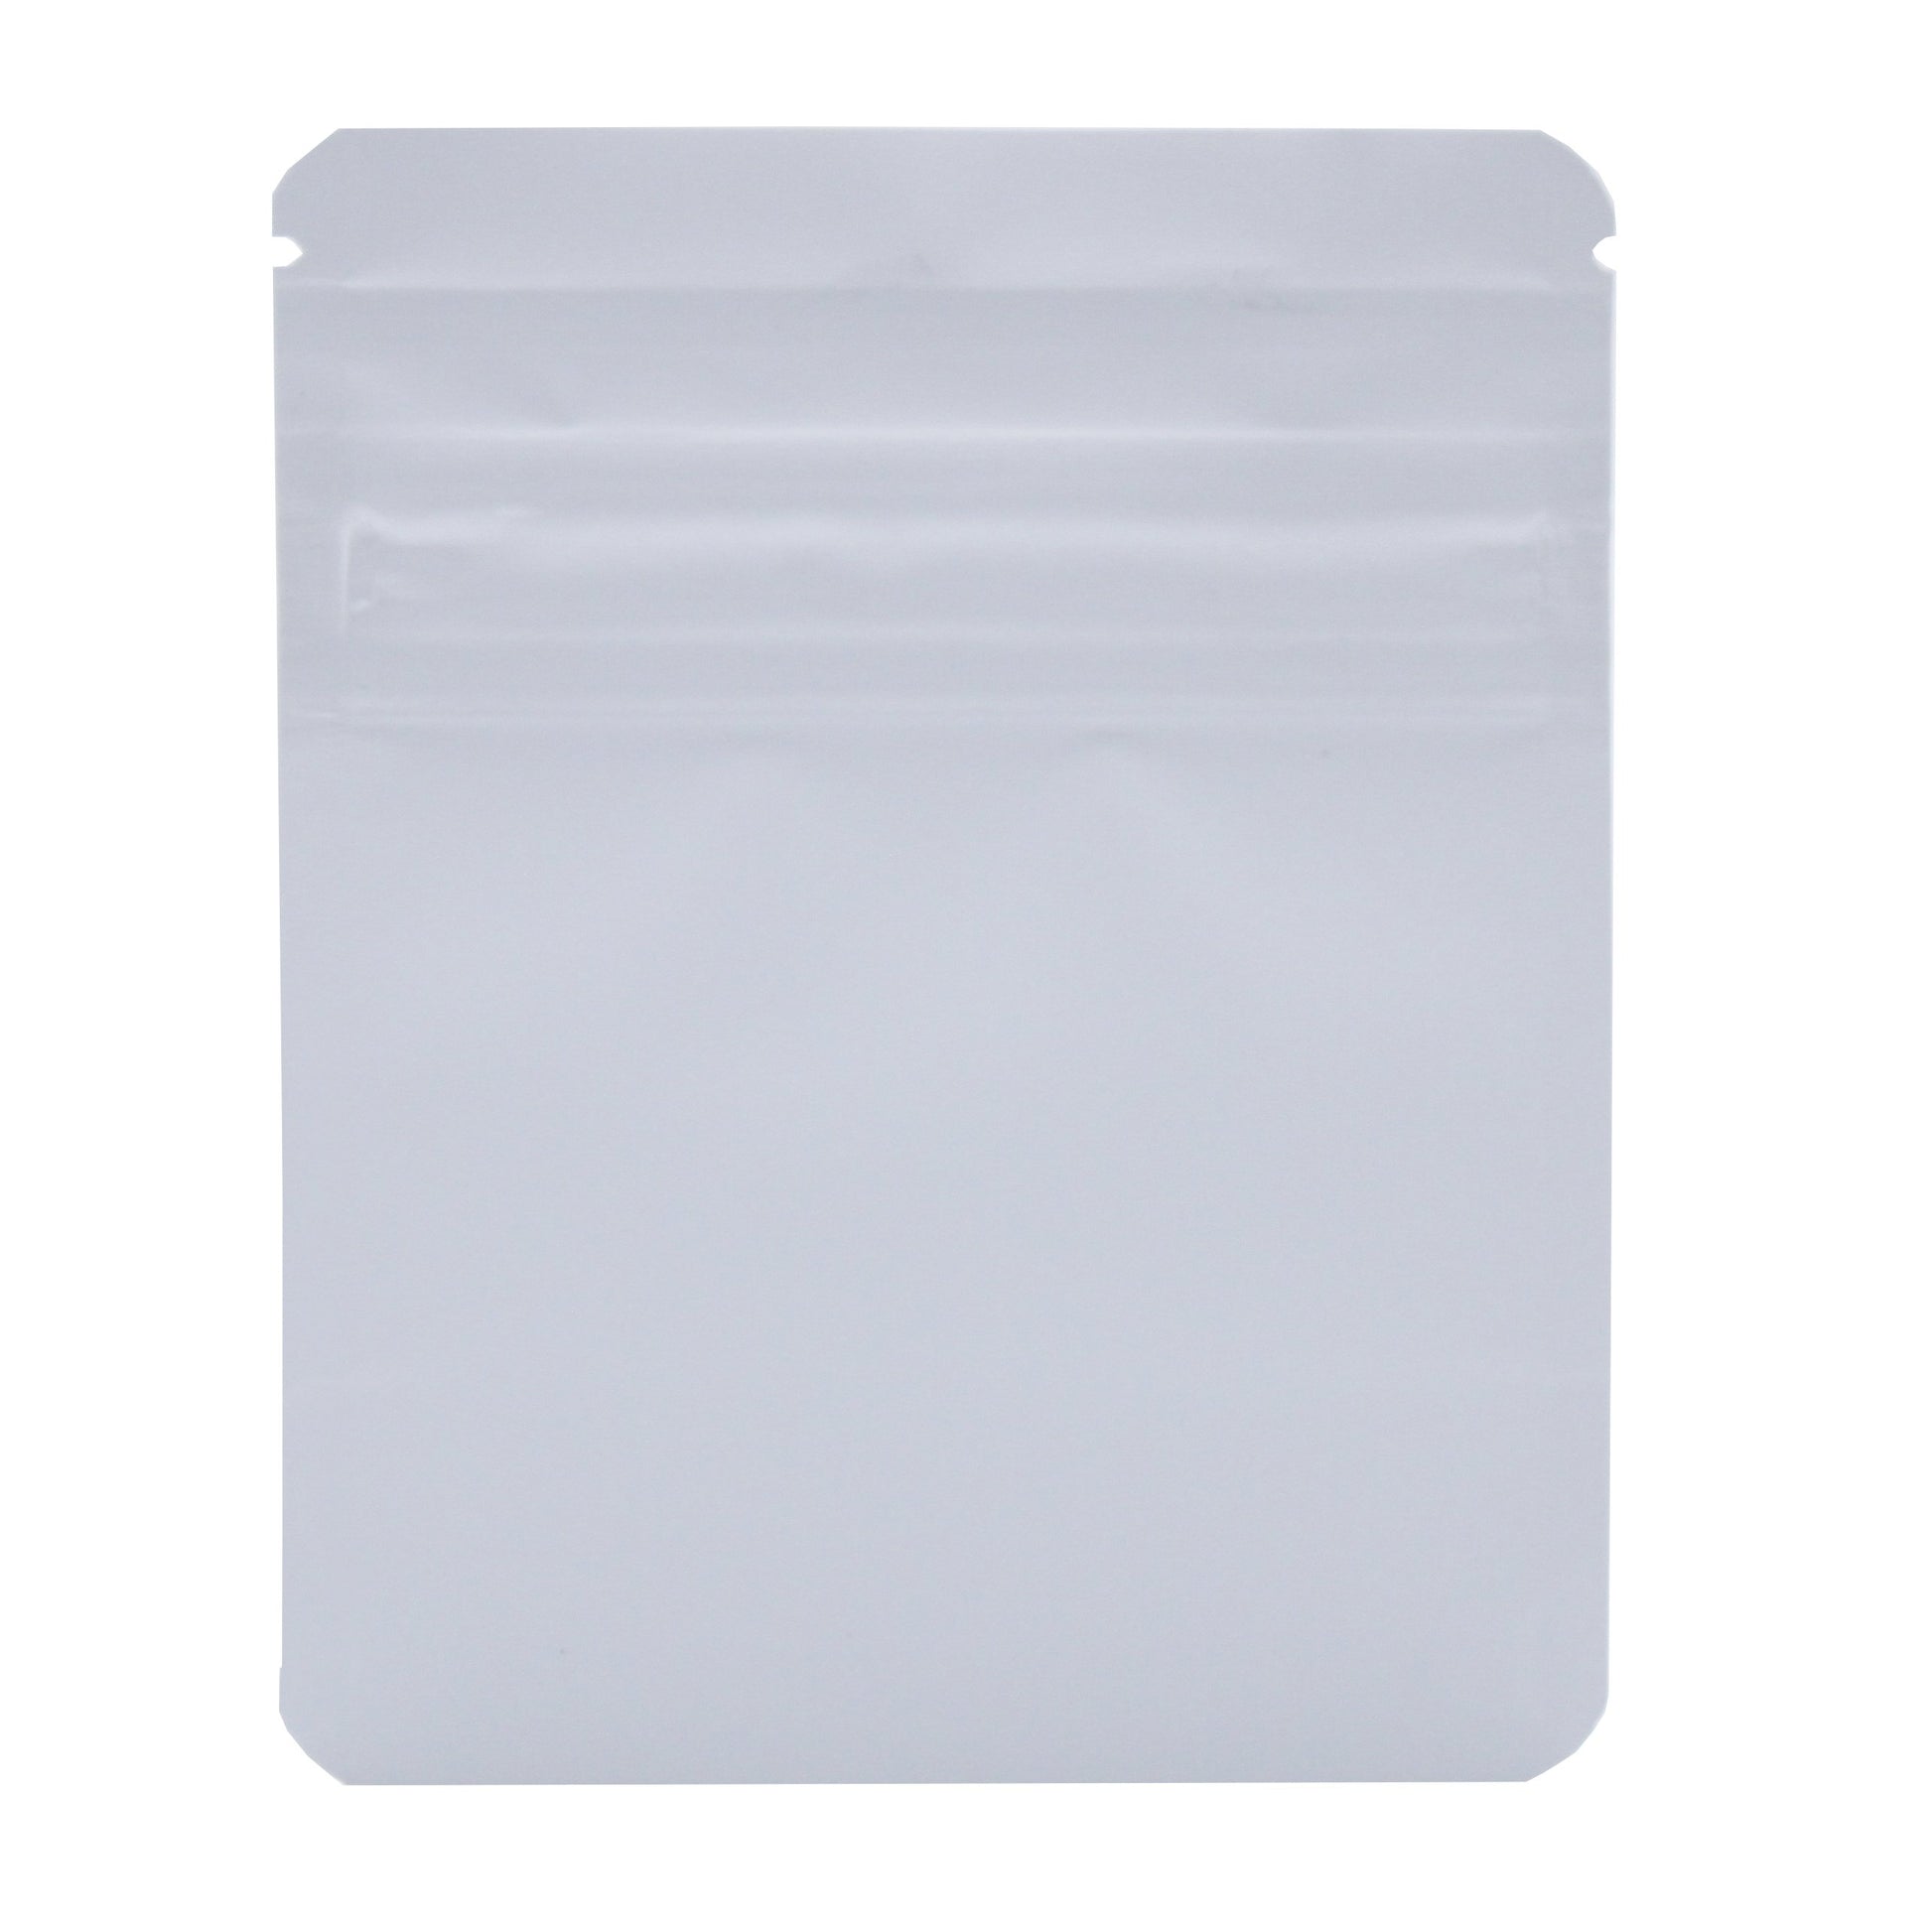 Bag King Child-Resistant Clear Front Wide Mouth Bag (1/8th oz) 3.9" x 4.9" Matte White